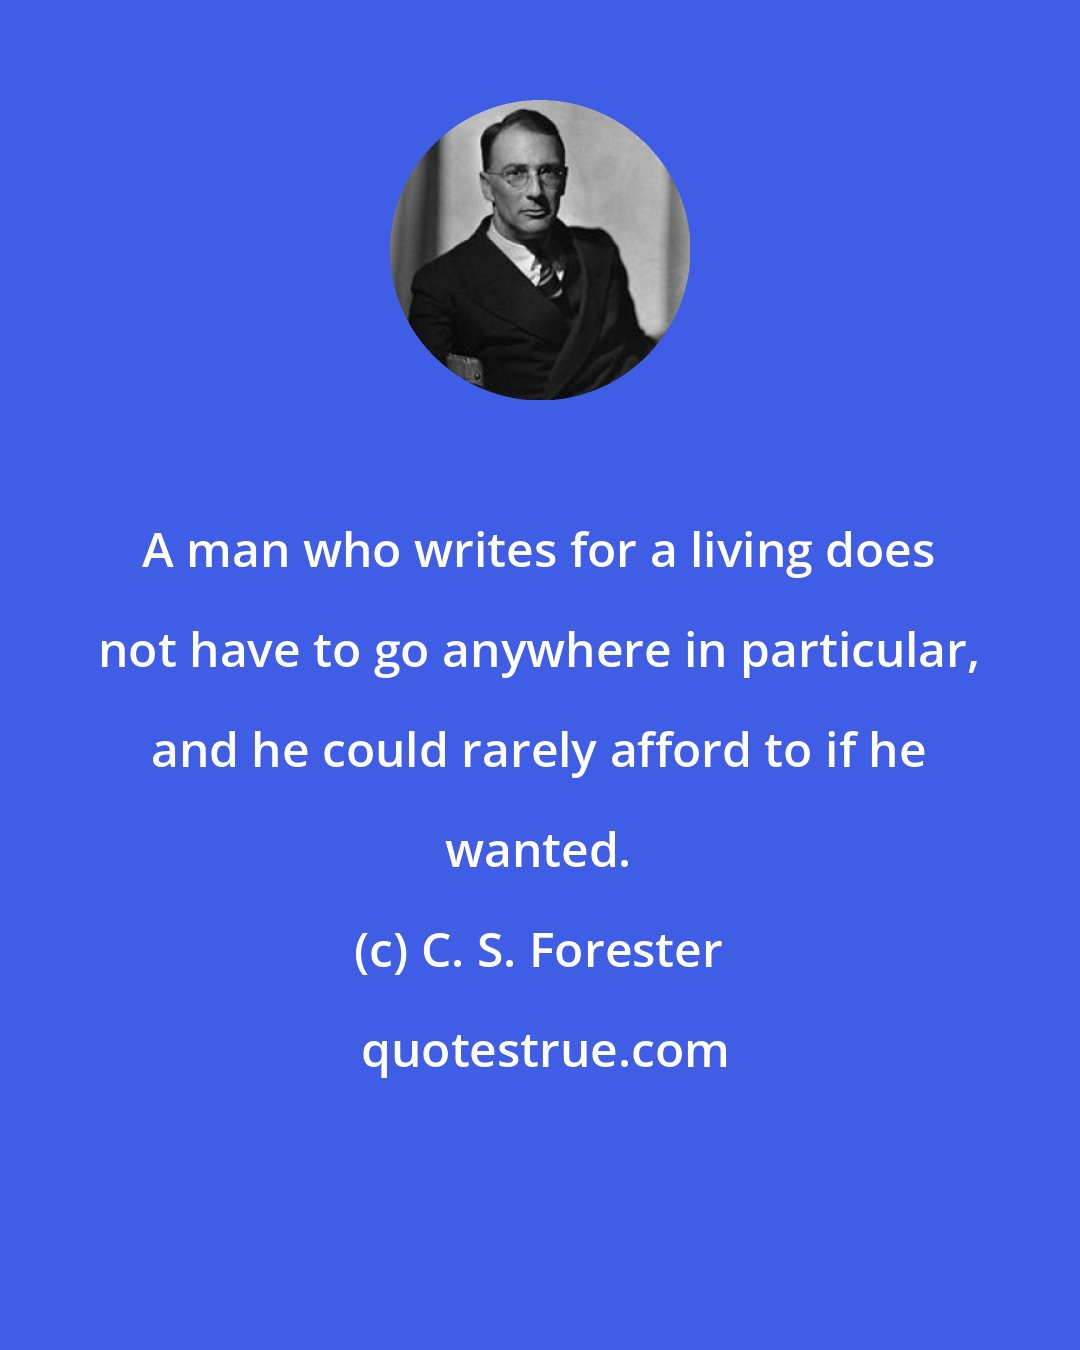 C. S. Forester: A man who writes for a living does not have to go anywhere in particular, and he could rarely afford to if he wanted.